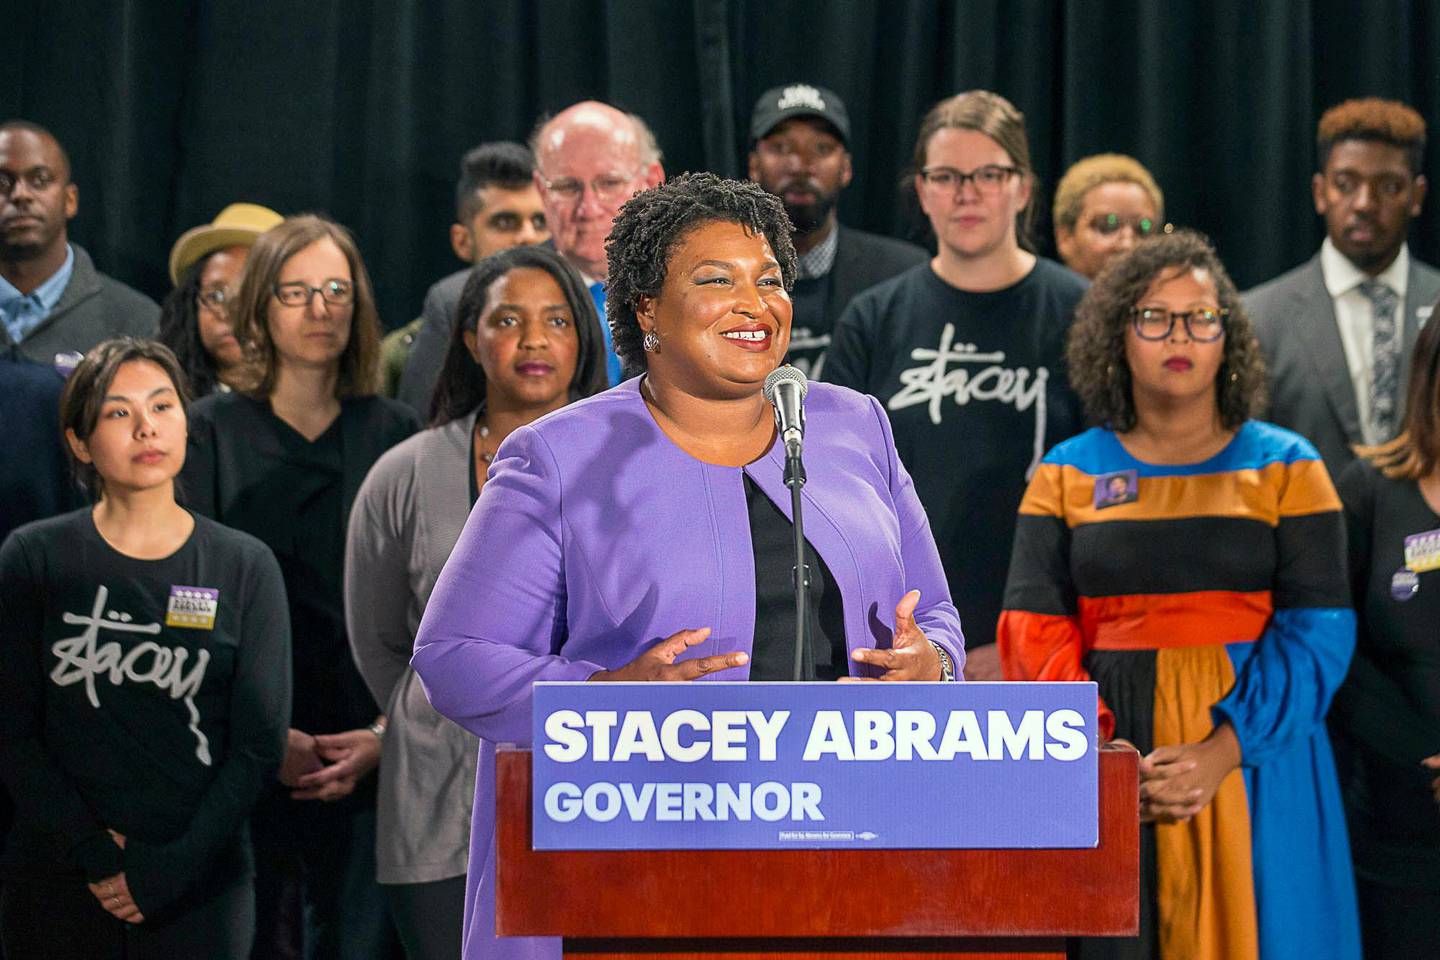 Georgia gubernatorial candidate Stacey Abrams makes remarks during a press conference at the Abrams Headquarters in Atlanta, Friday, Nov. 16, 2018. Democrat Stacey Abrams says she will file a federal lawsuit to challenge the "gross mismanagement" of Georgia elections. Abrams made the comments in a Friday speech, shortly after she said she can't win the race, effectively ending her challenge to Republican Brian Kemp. (Alyssa Pointer/Atlanta Journal-Constitution via AP)